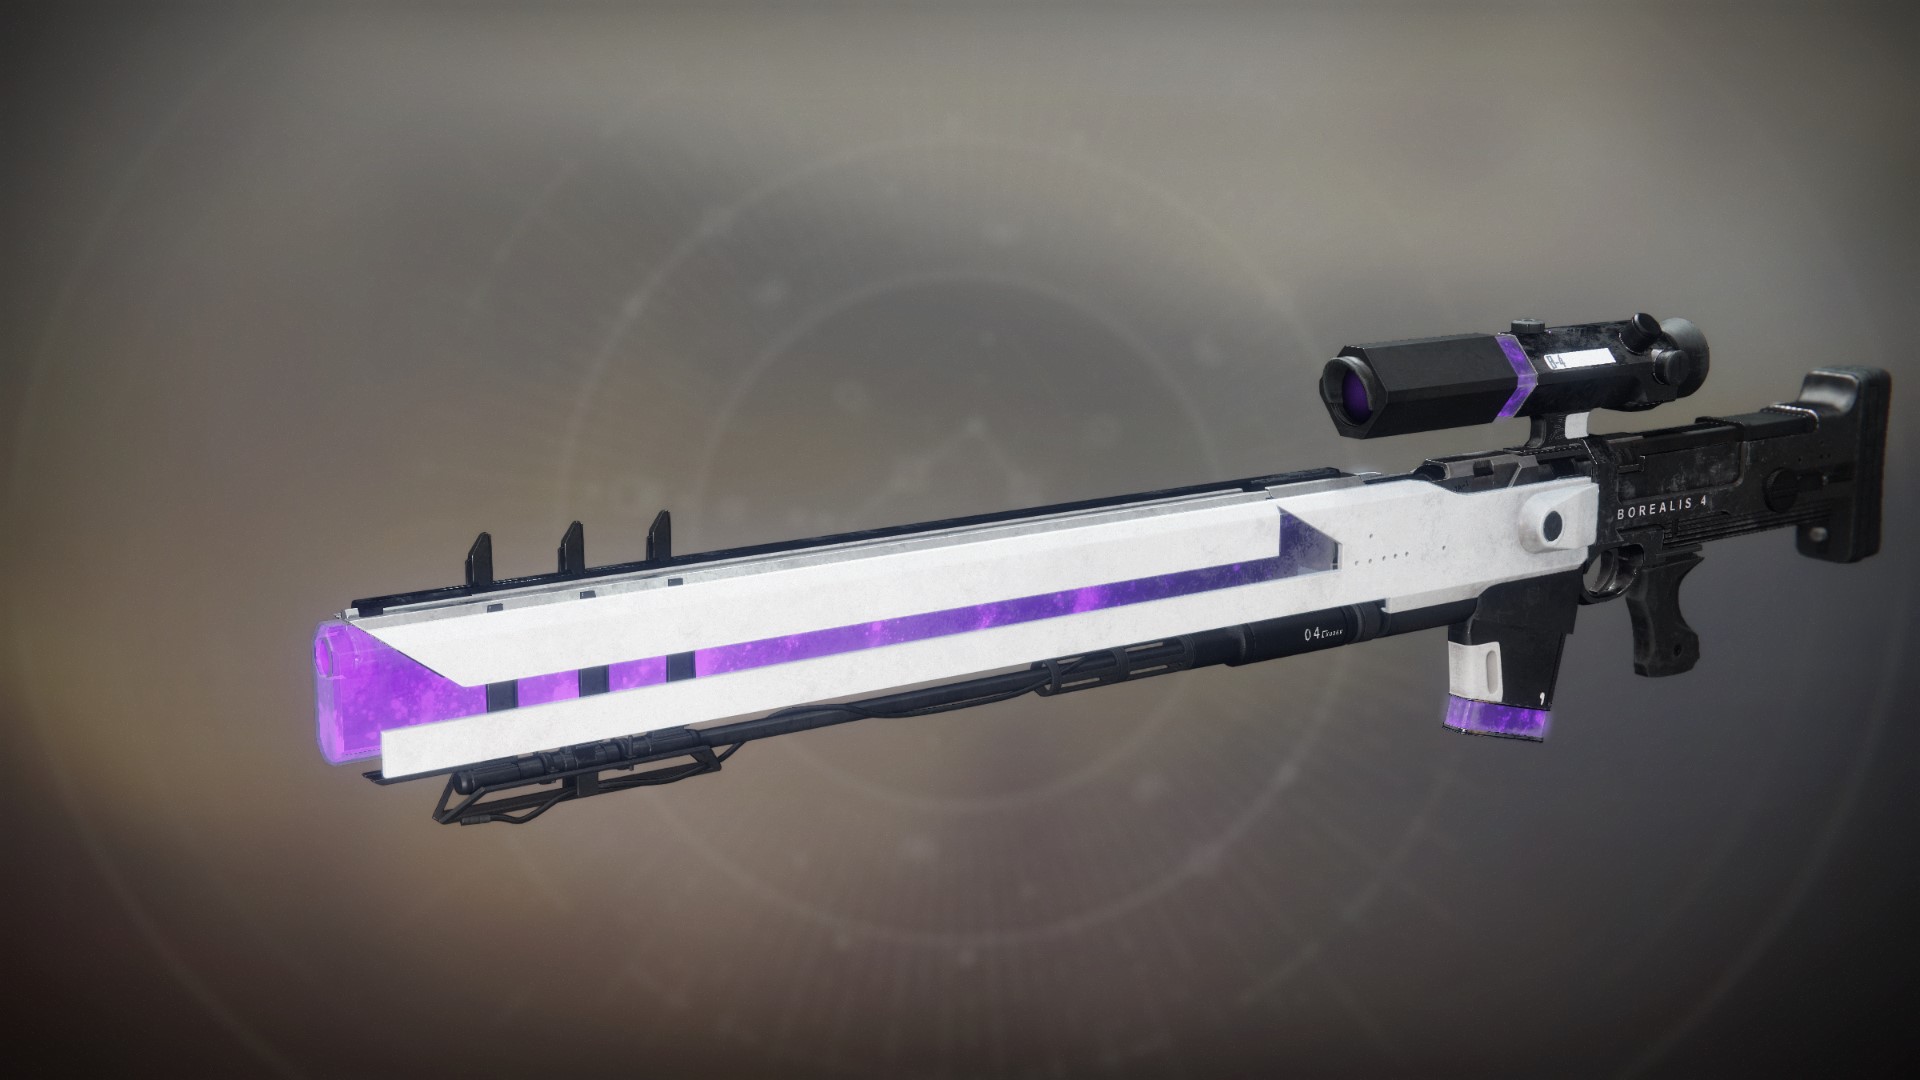 An in-game render of the Ultraviolet.